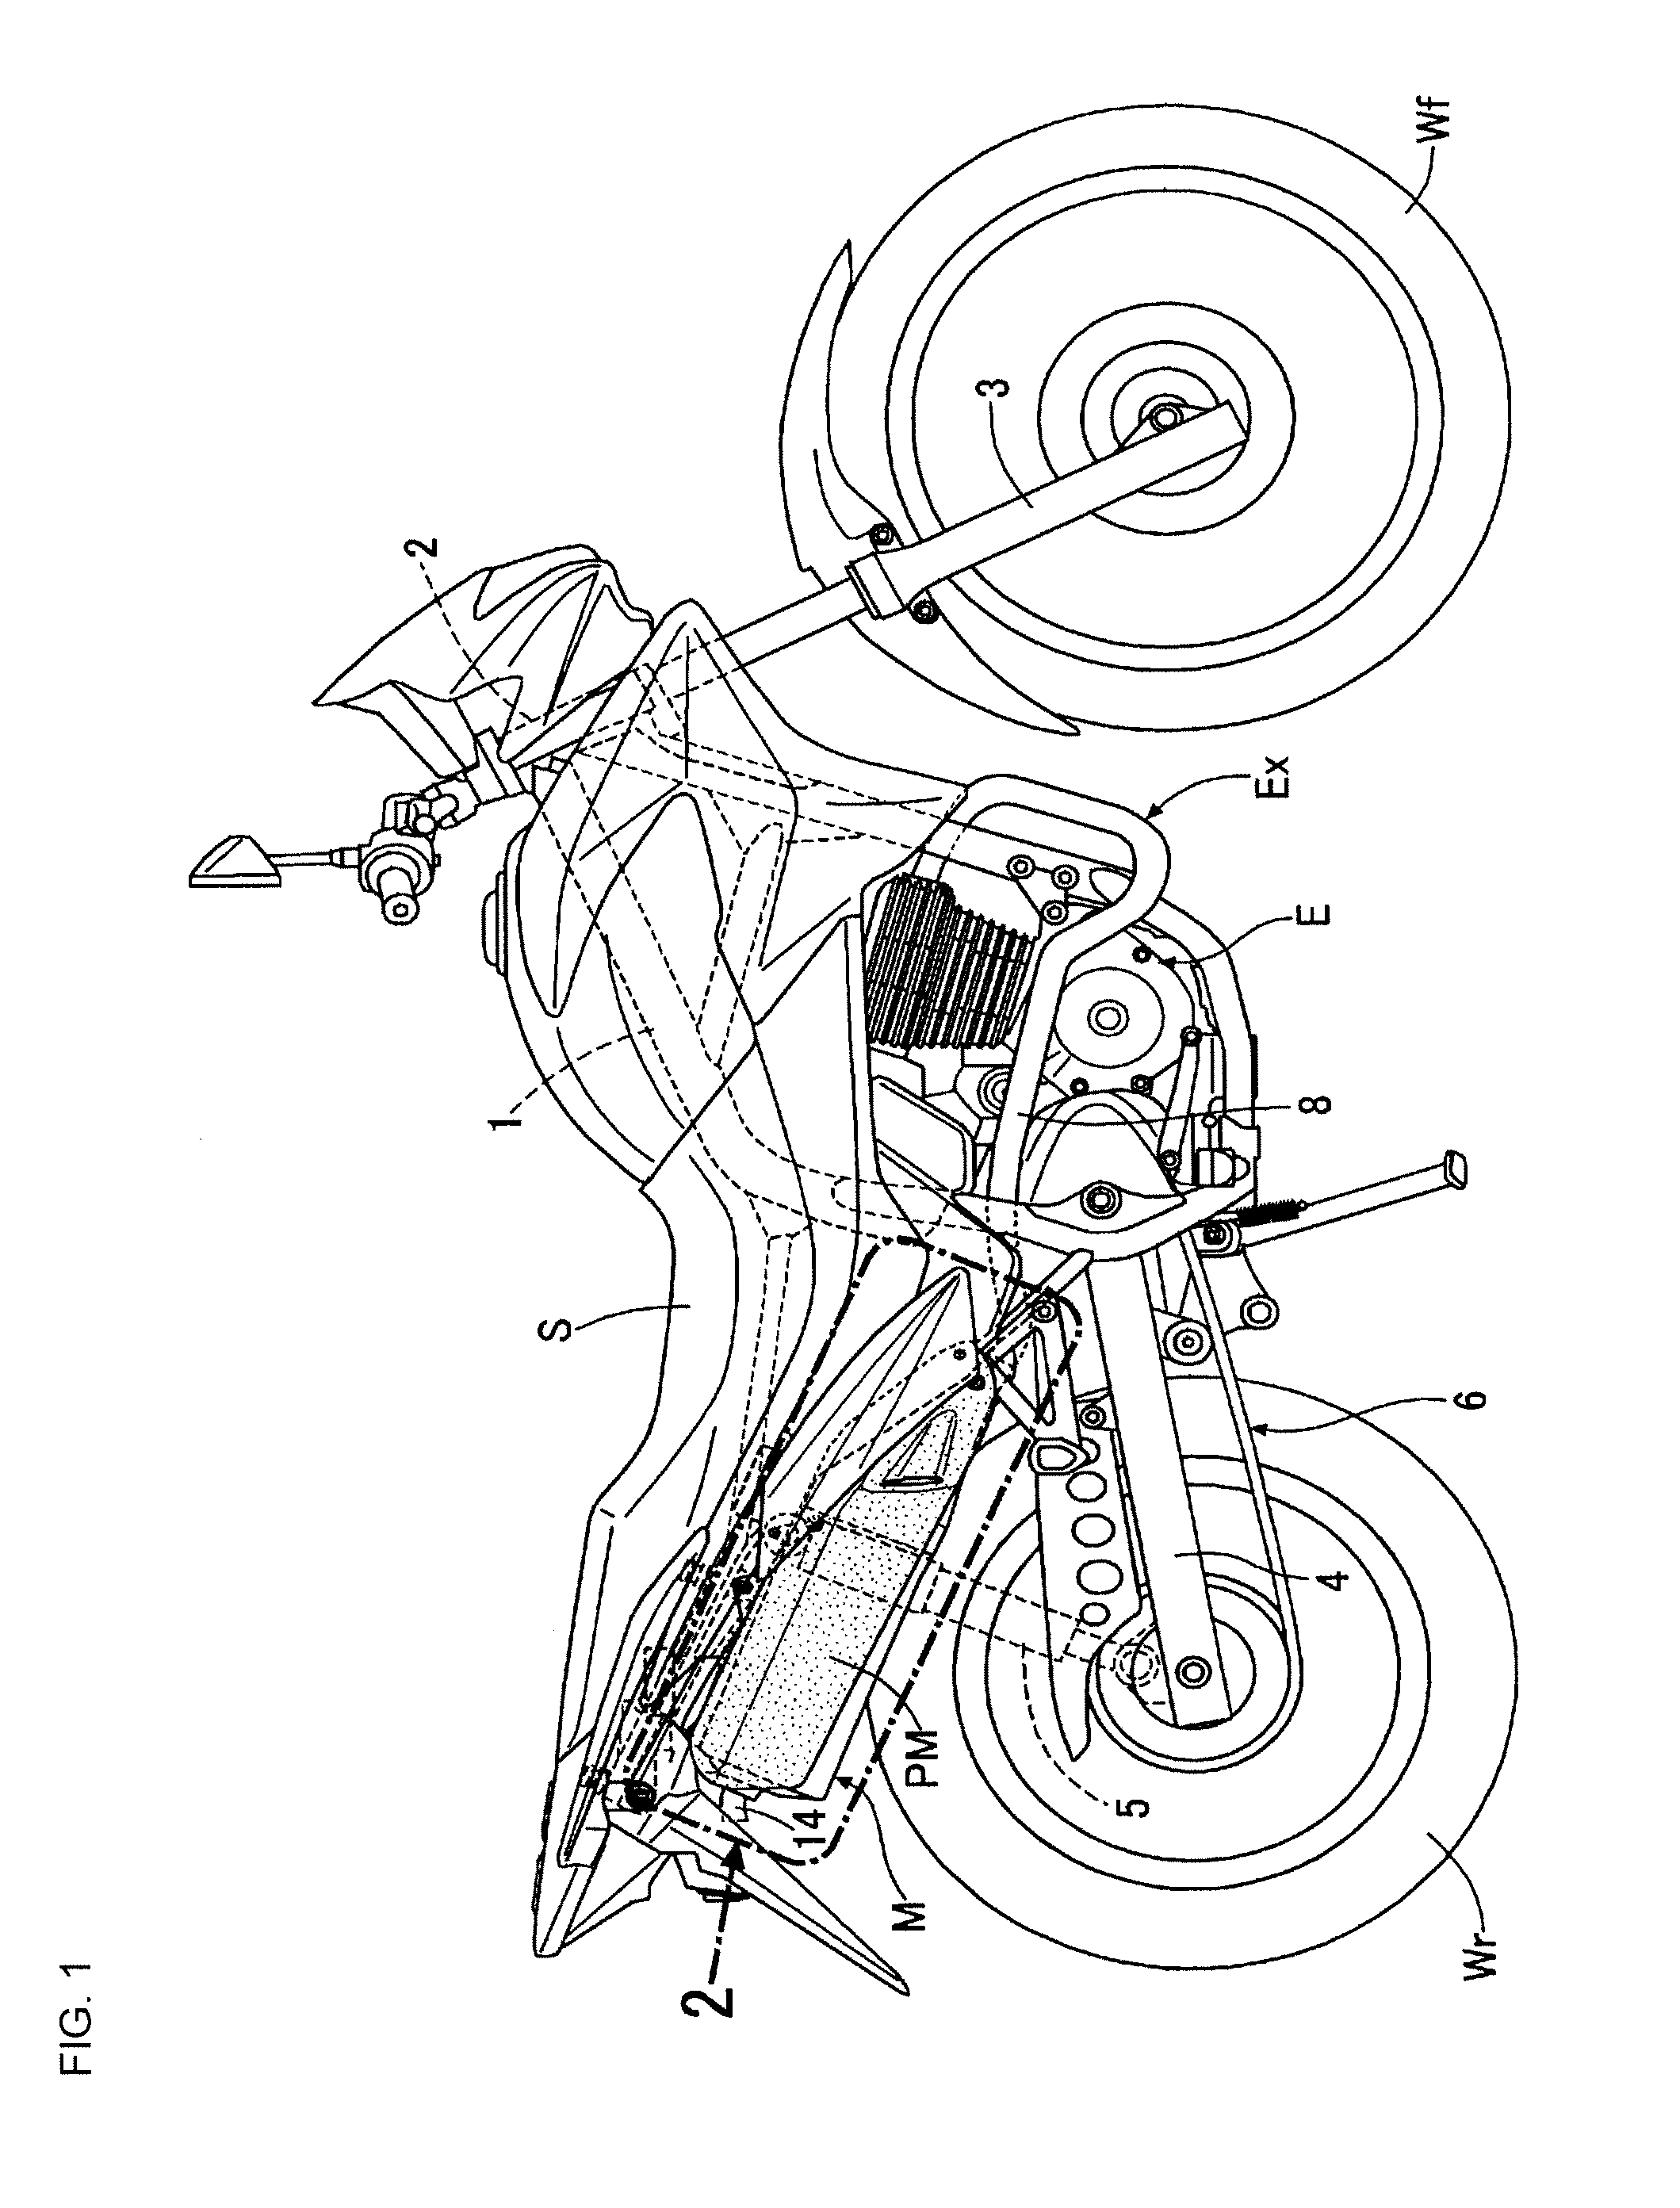 Muffler for small-sized vehicle